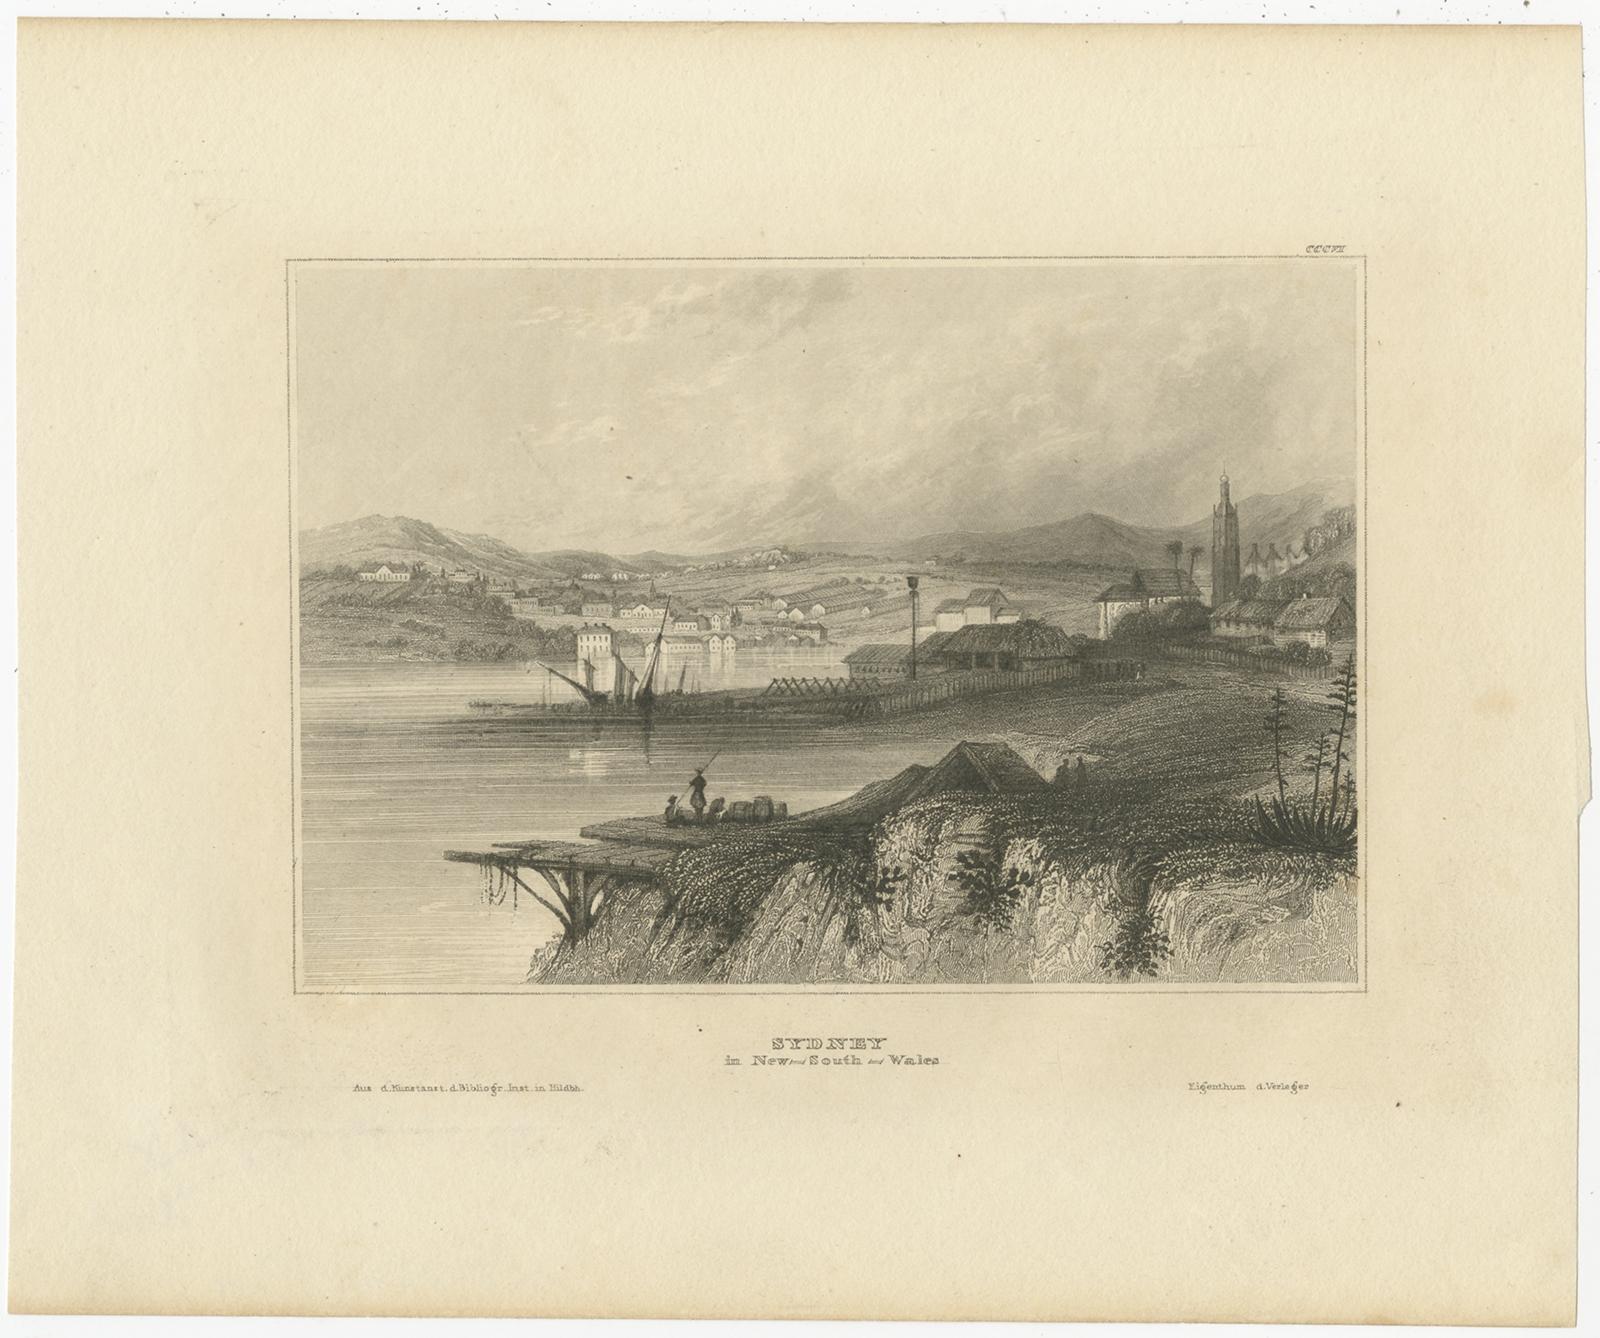 Description: Antique print titled 'Sydney in New-South-Wales'. 

View of the city of Sydney, Australia. Originates from 'Meyers Universum'. 

Artists and Engravers: Joseph Meyer (May 9, 1796 - June 27, 1856) was a German industrialist and